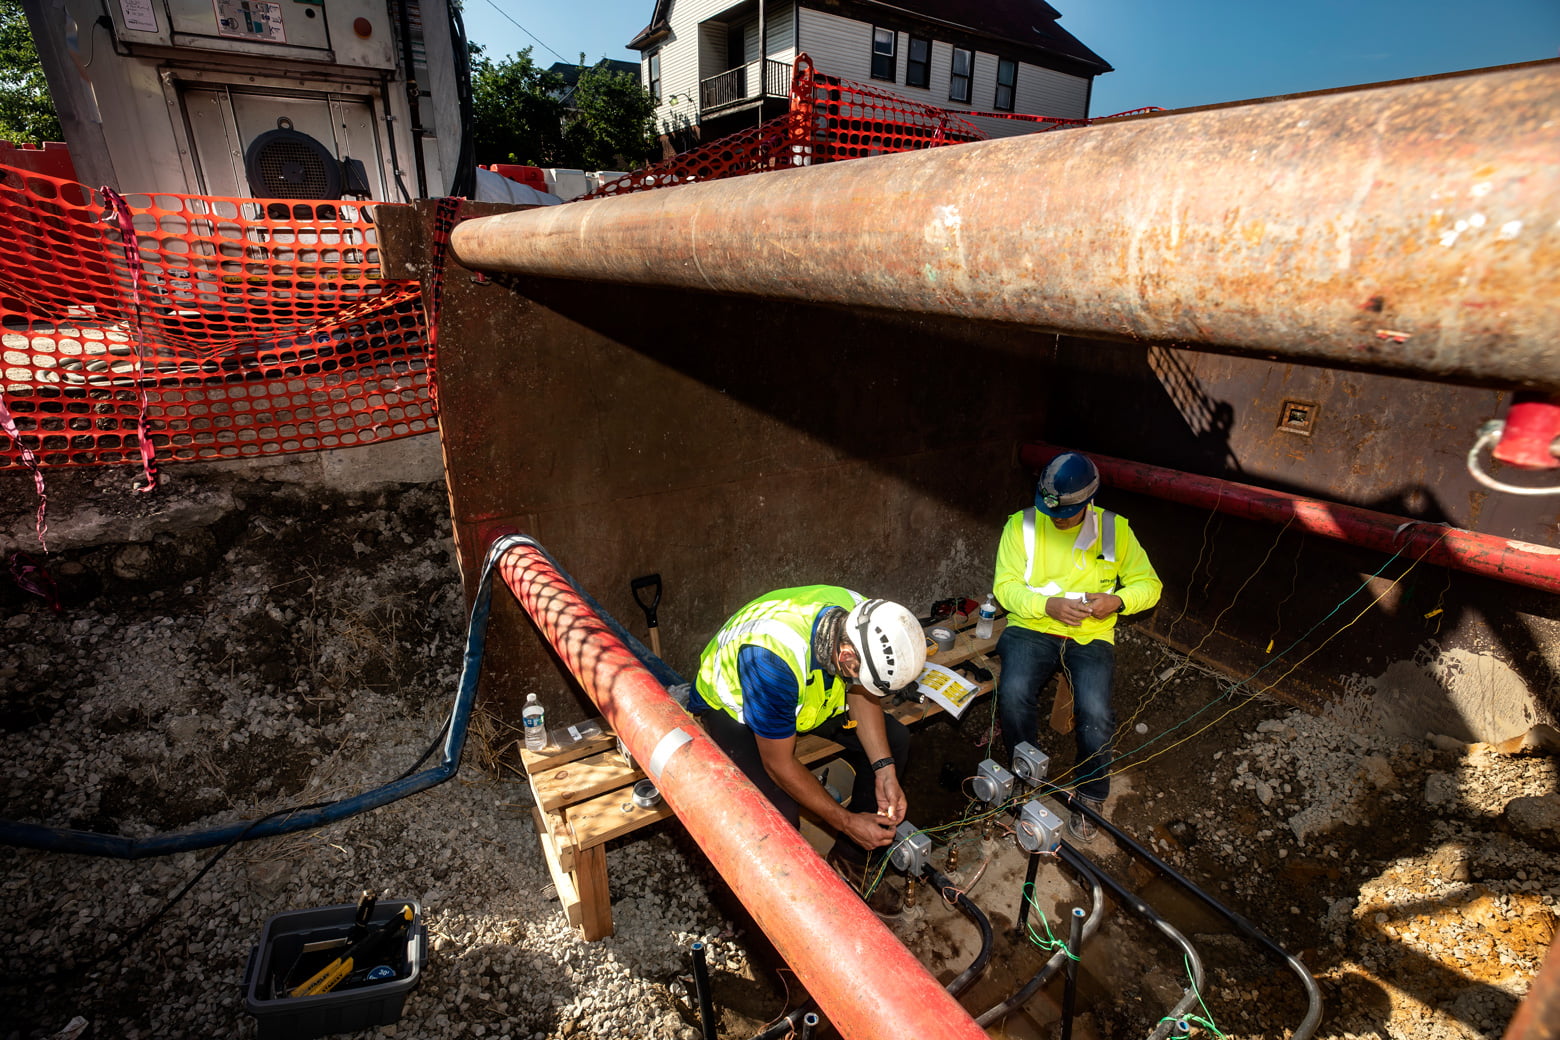 New tech solutions applied to old water pipes